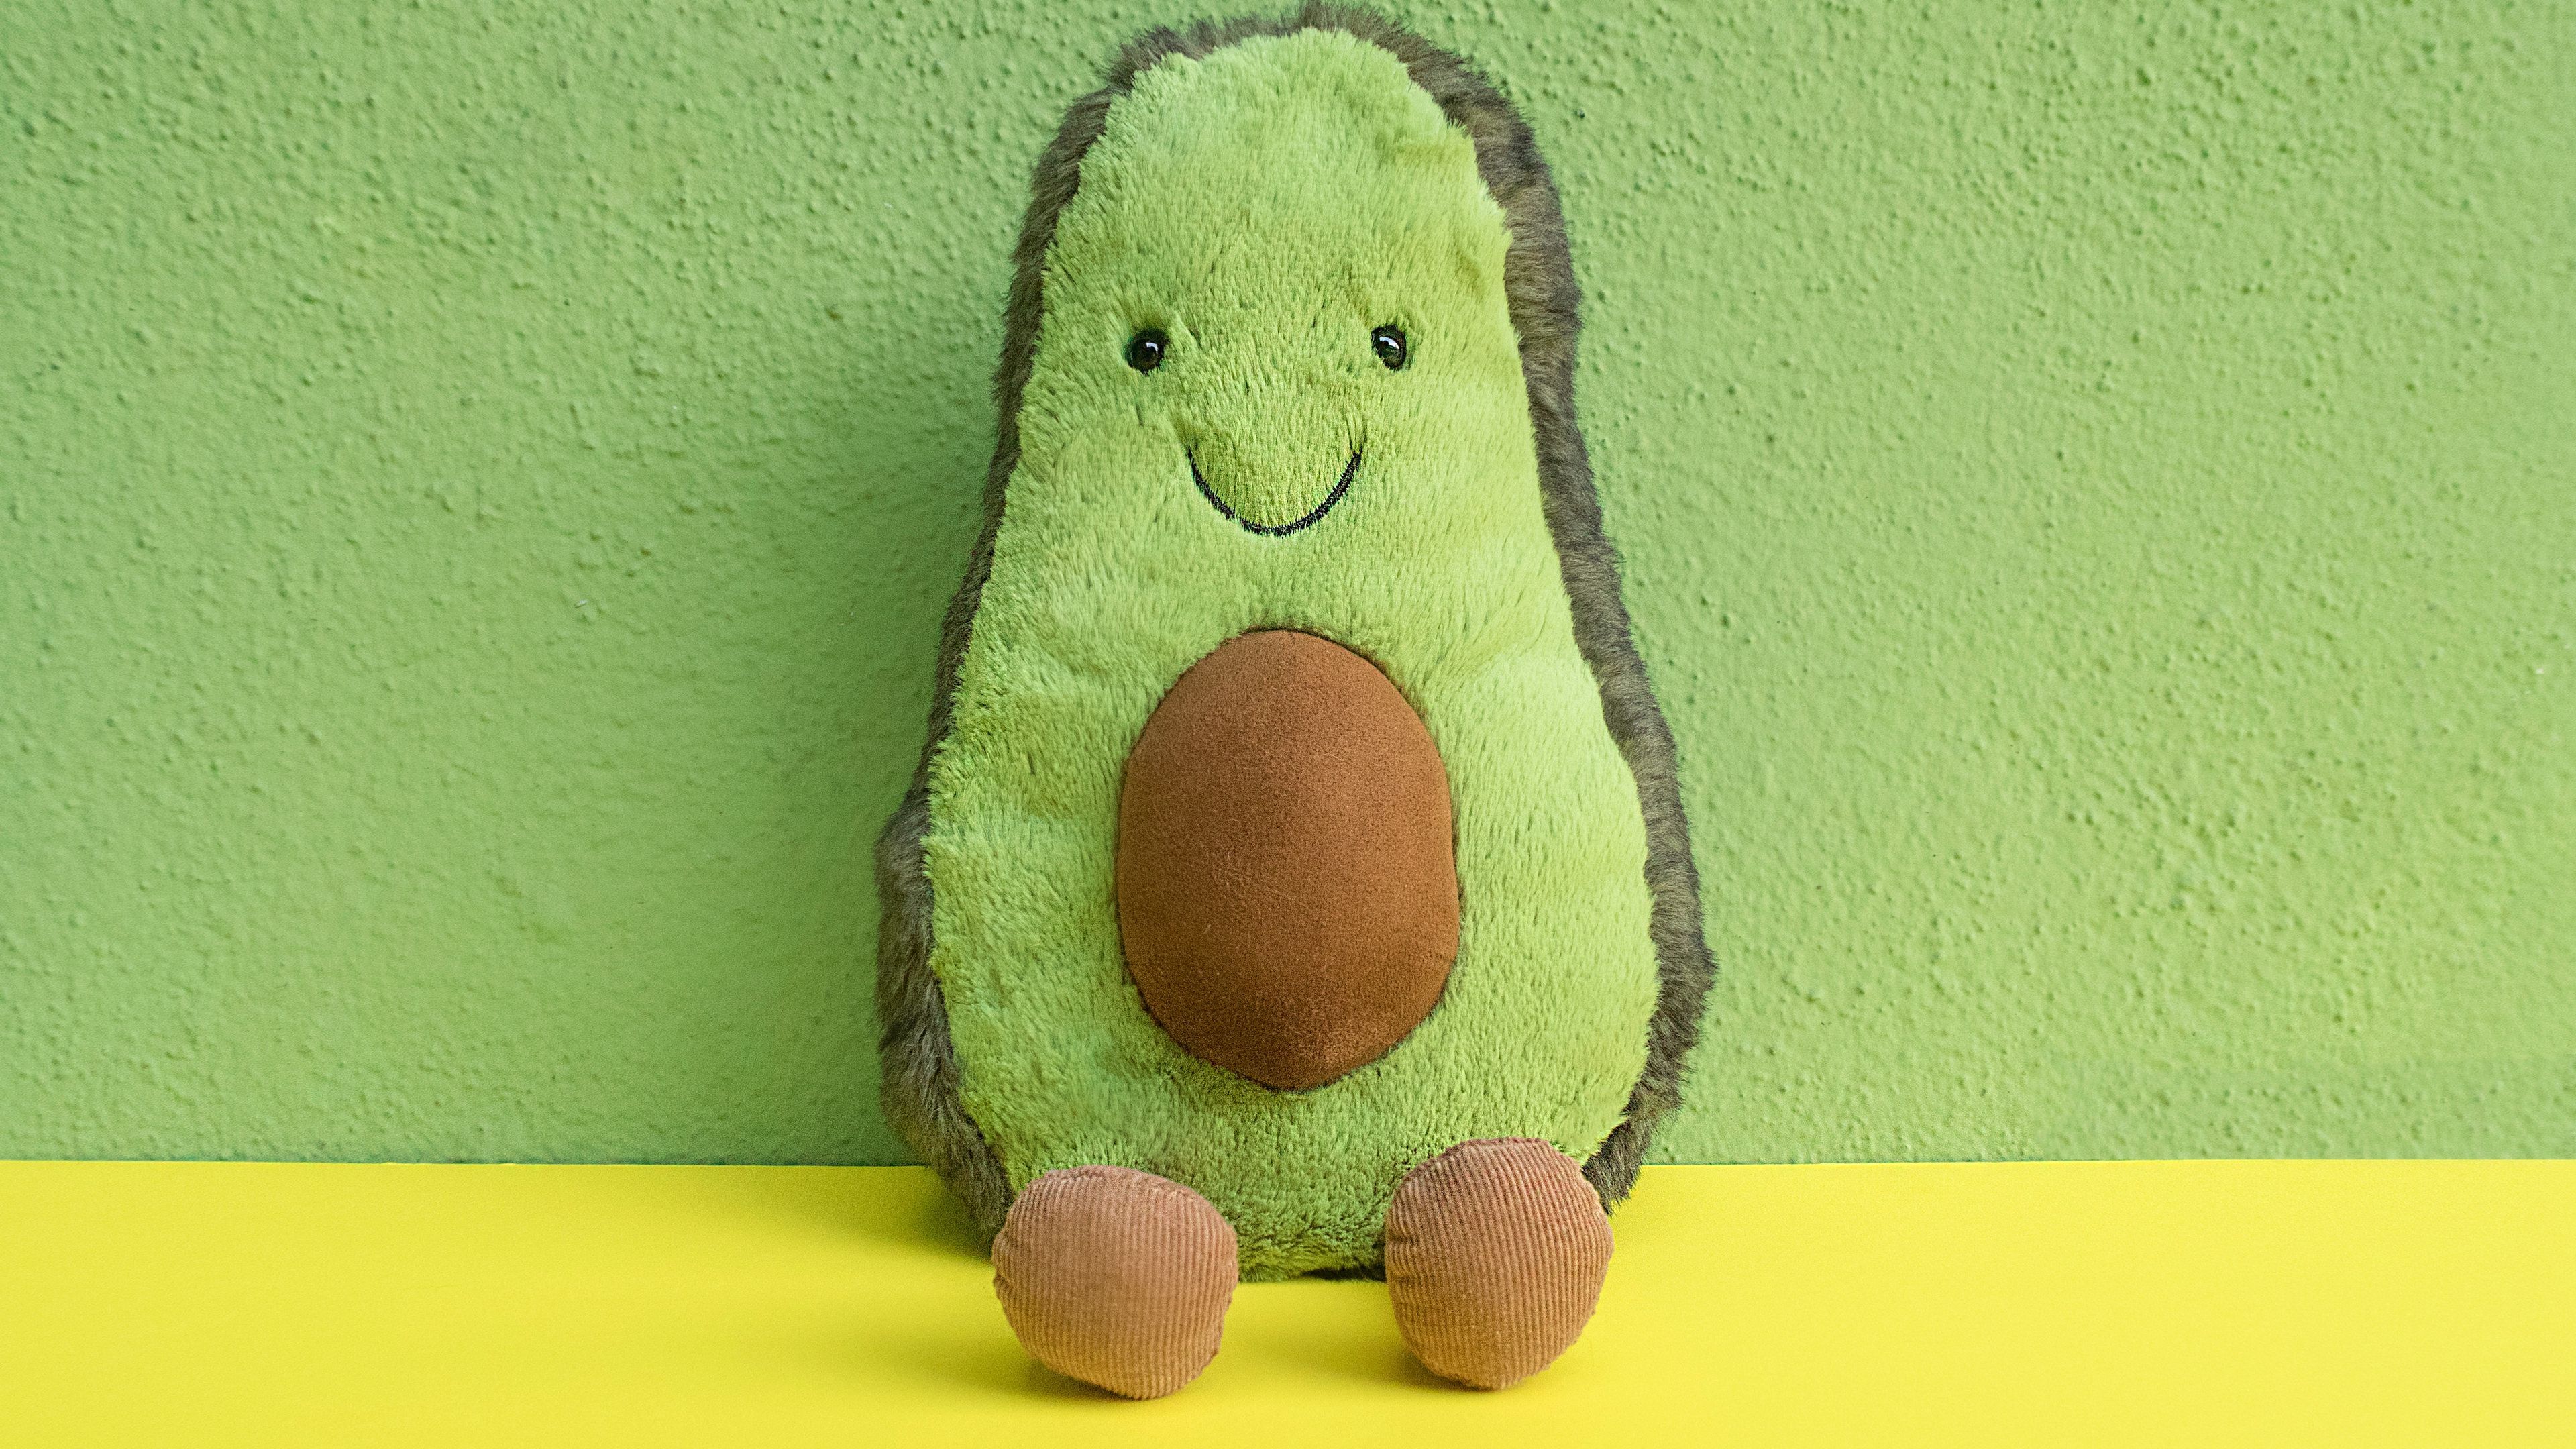 Download wallpapers 3840x2160 toy, teddy, avocado, cute, green 4k uhd 16:9 hd backgrounds